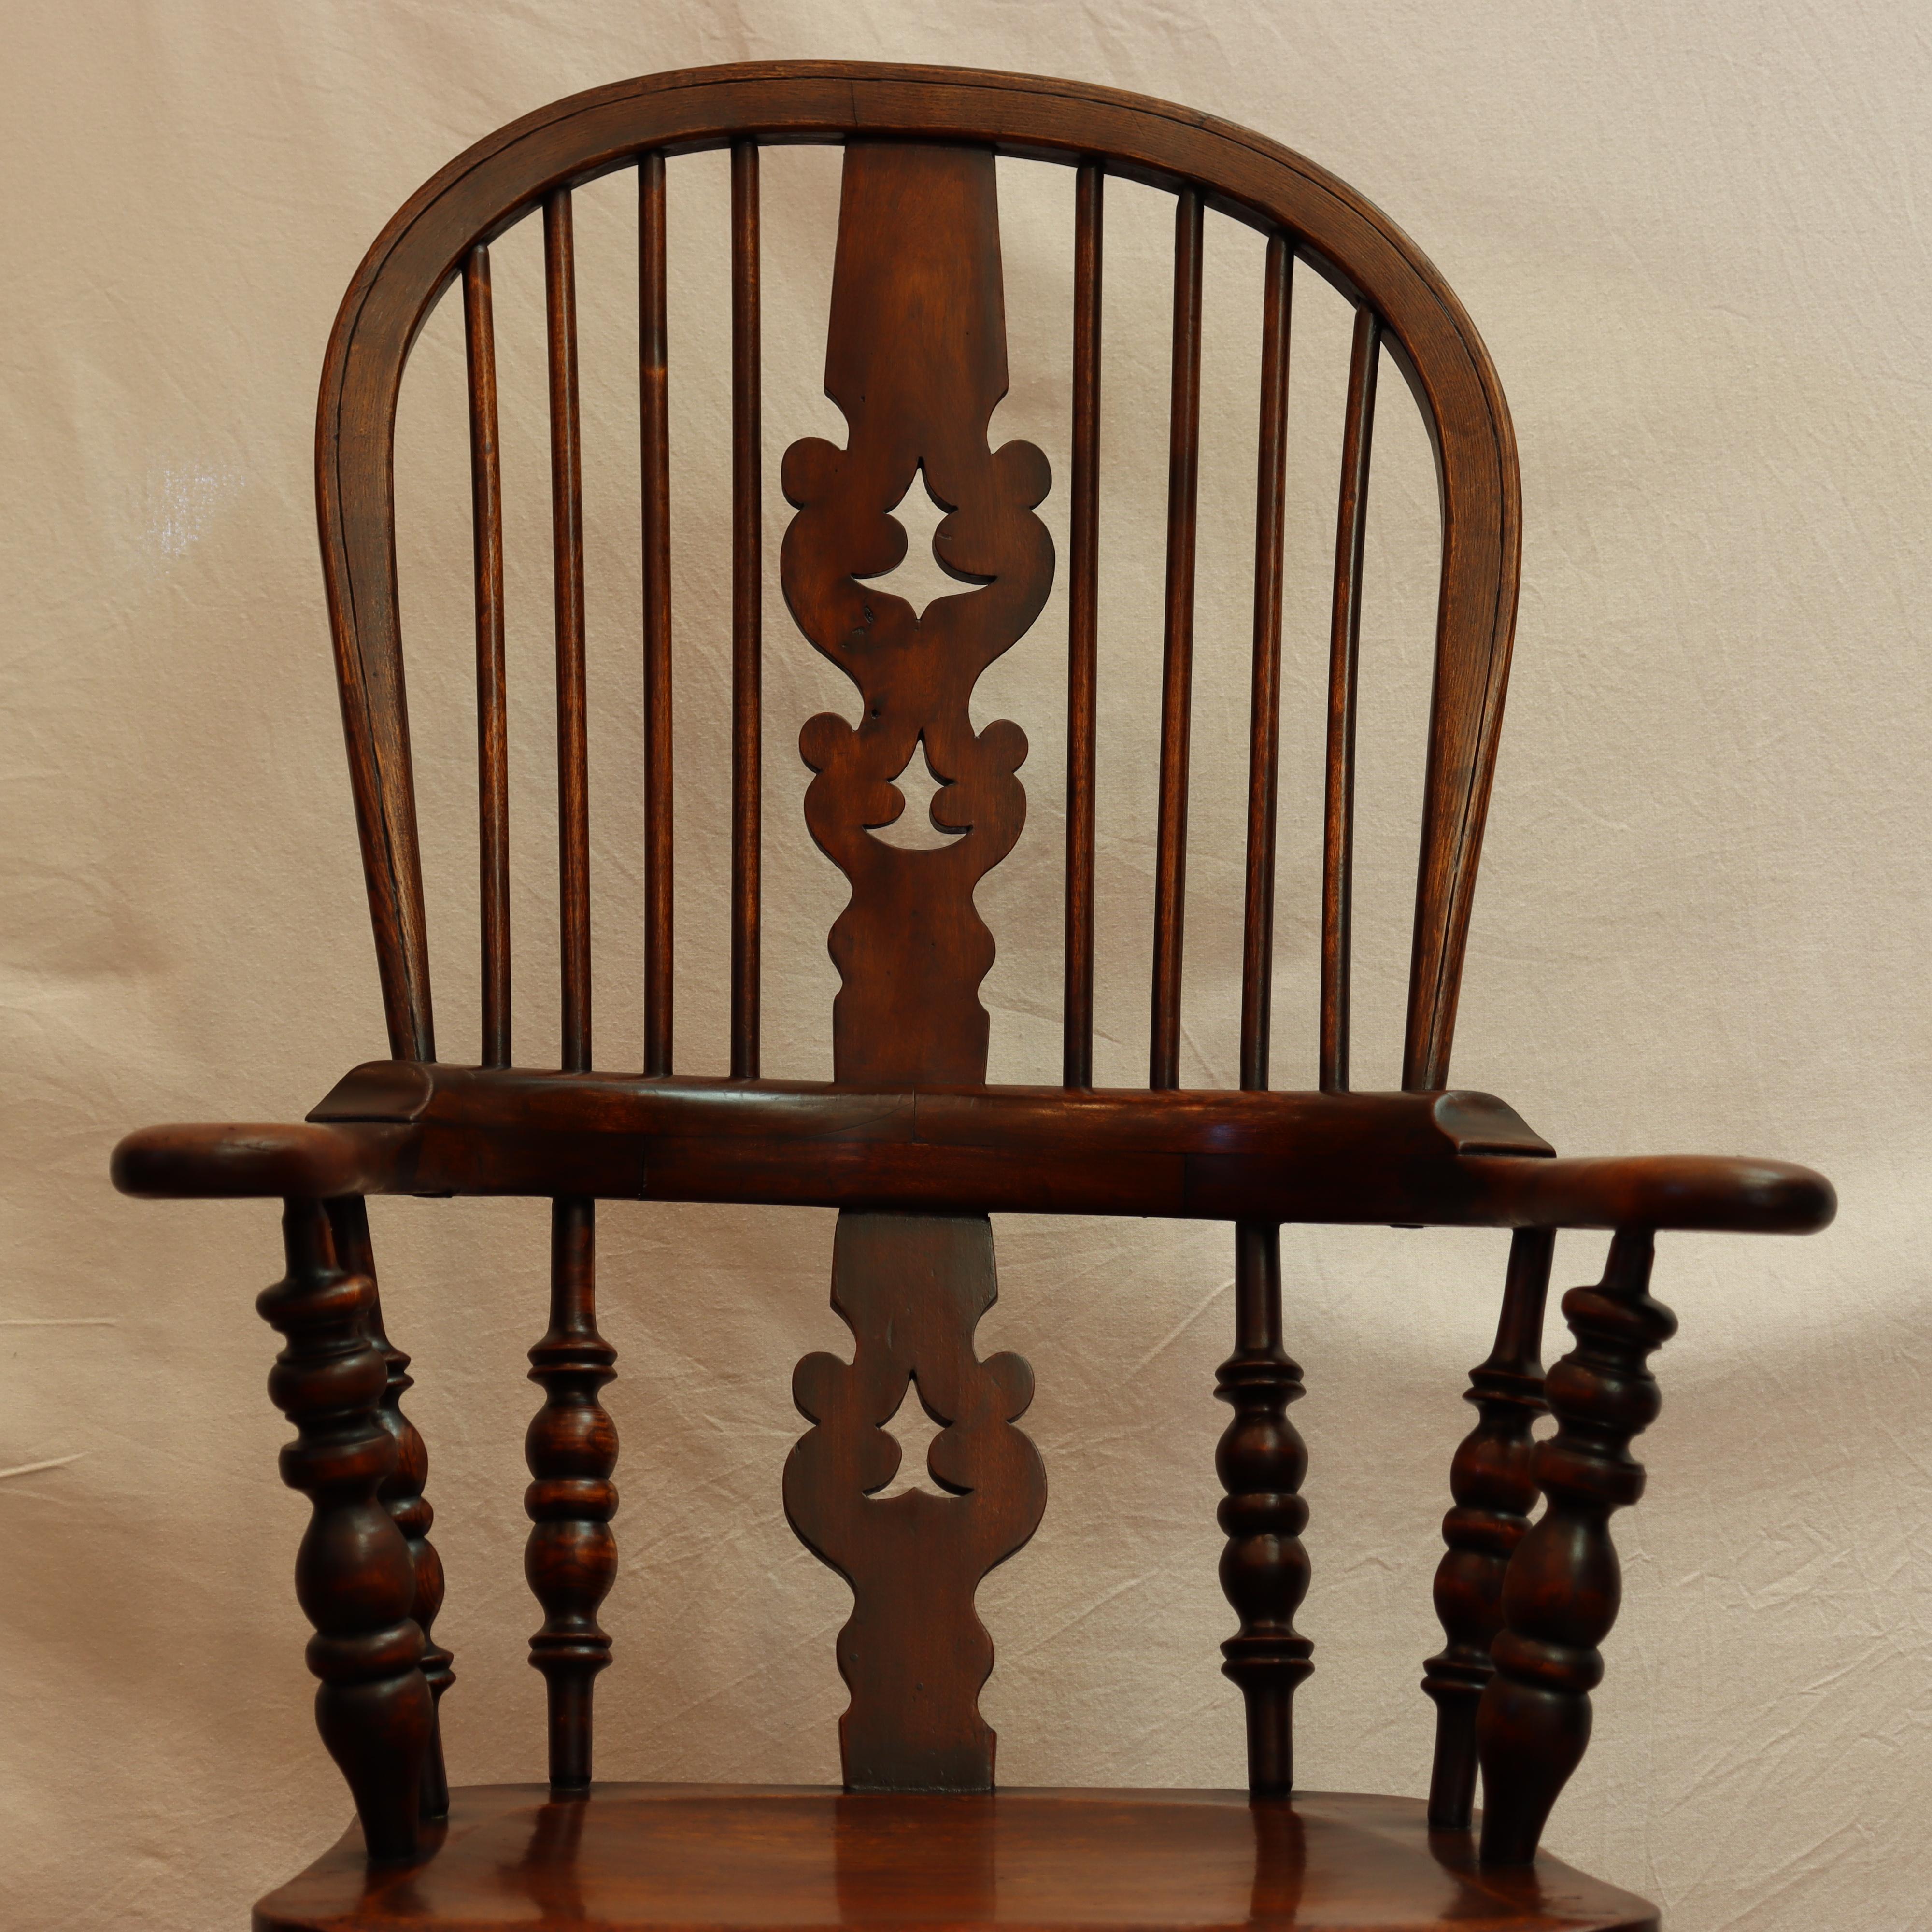 British Antique Early 18th Century Yew Wood & Elm English Fiddleback Windsor Armchair For Sale